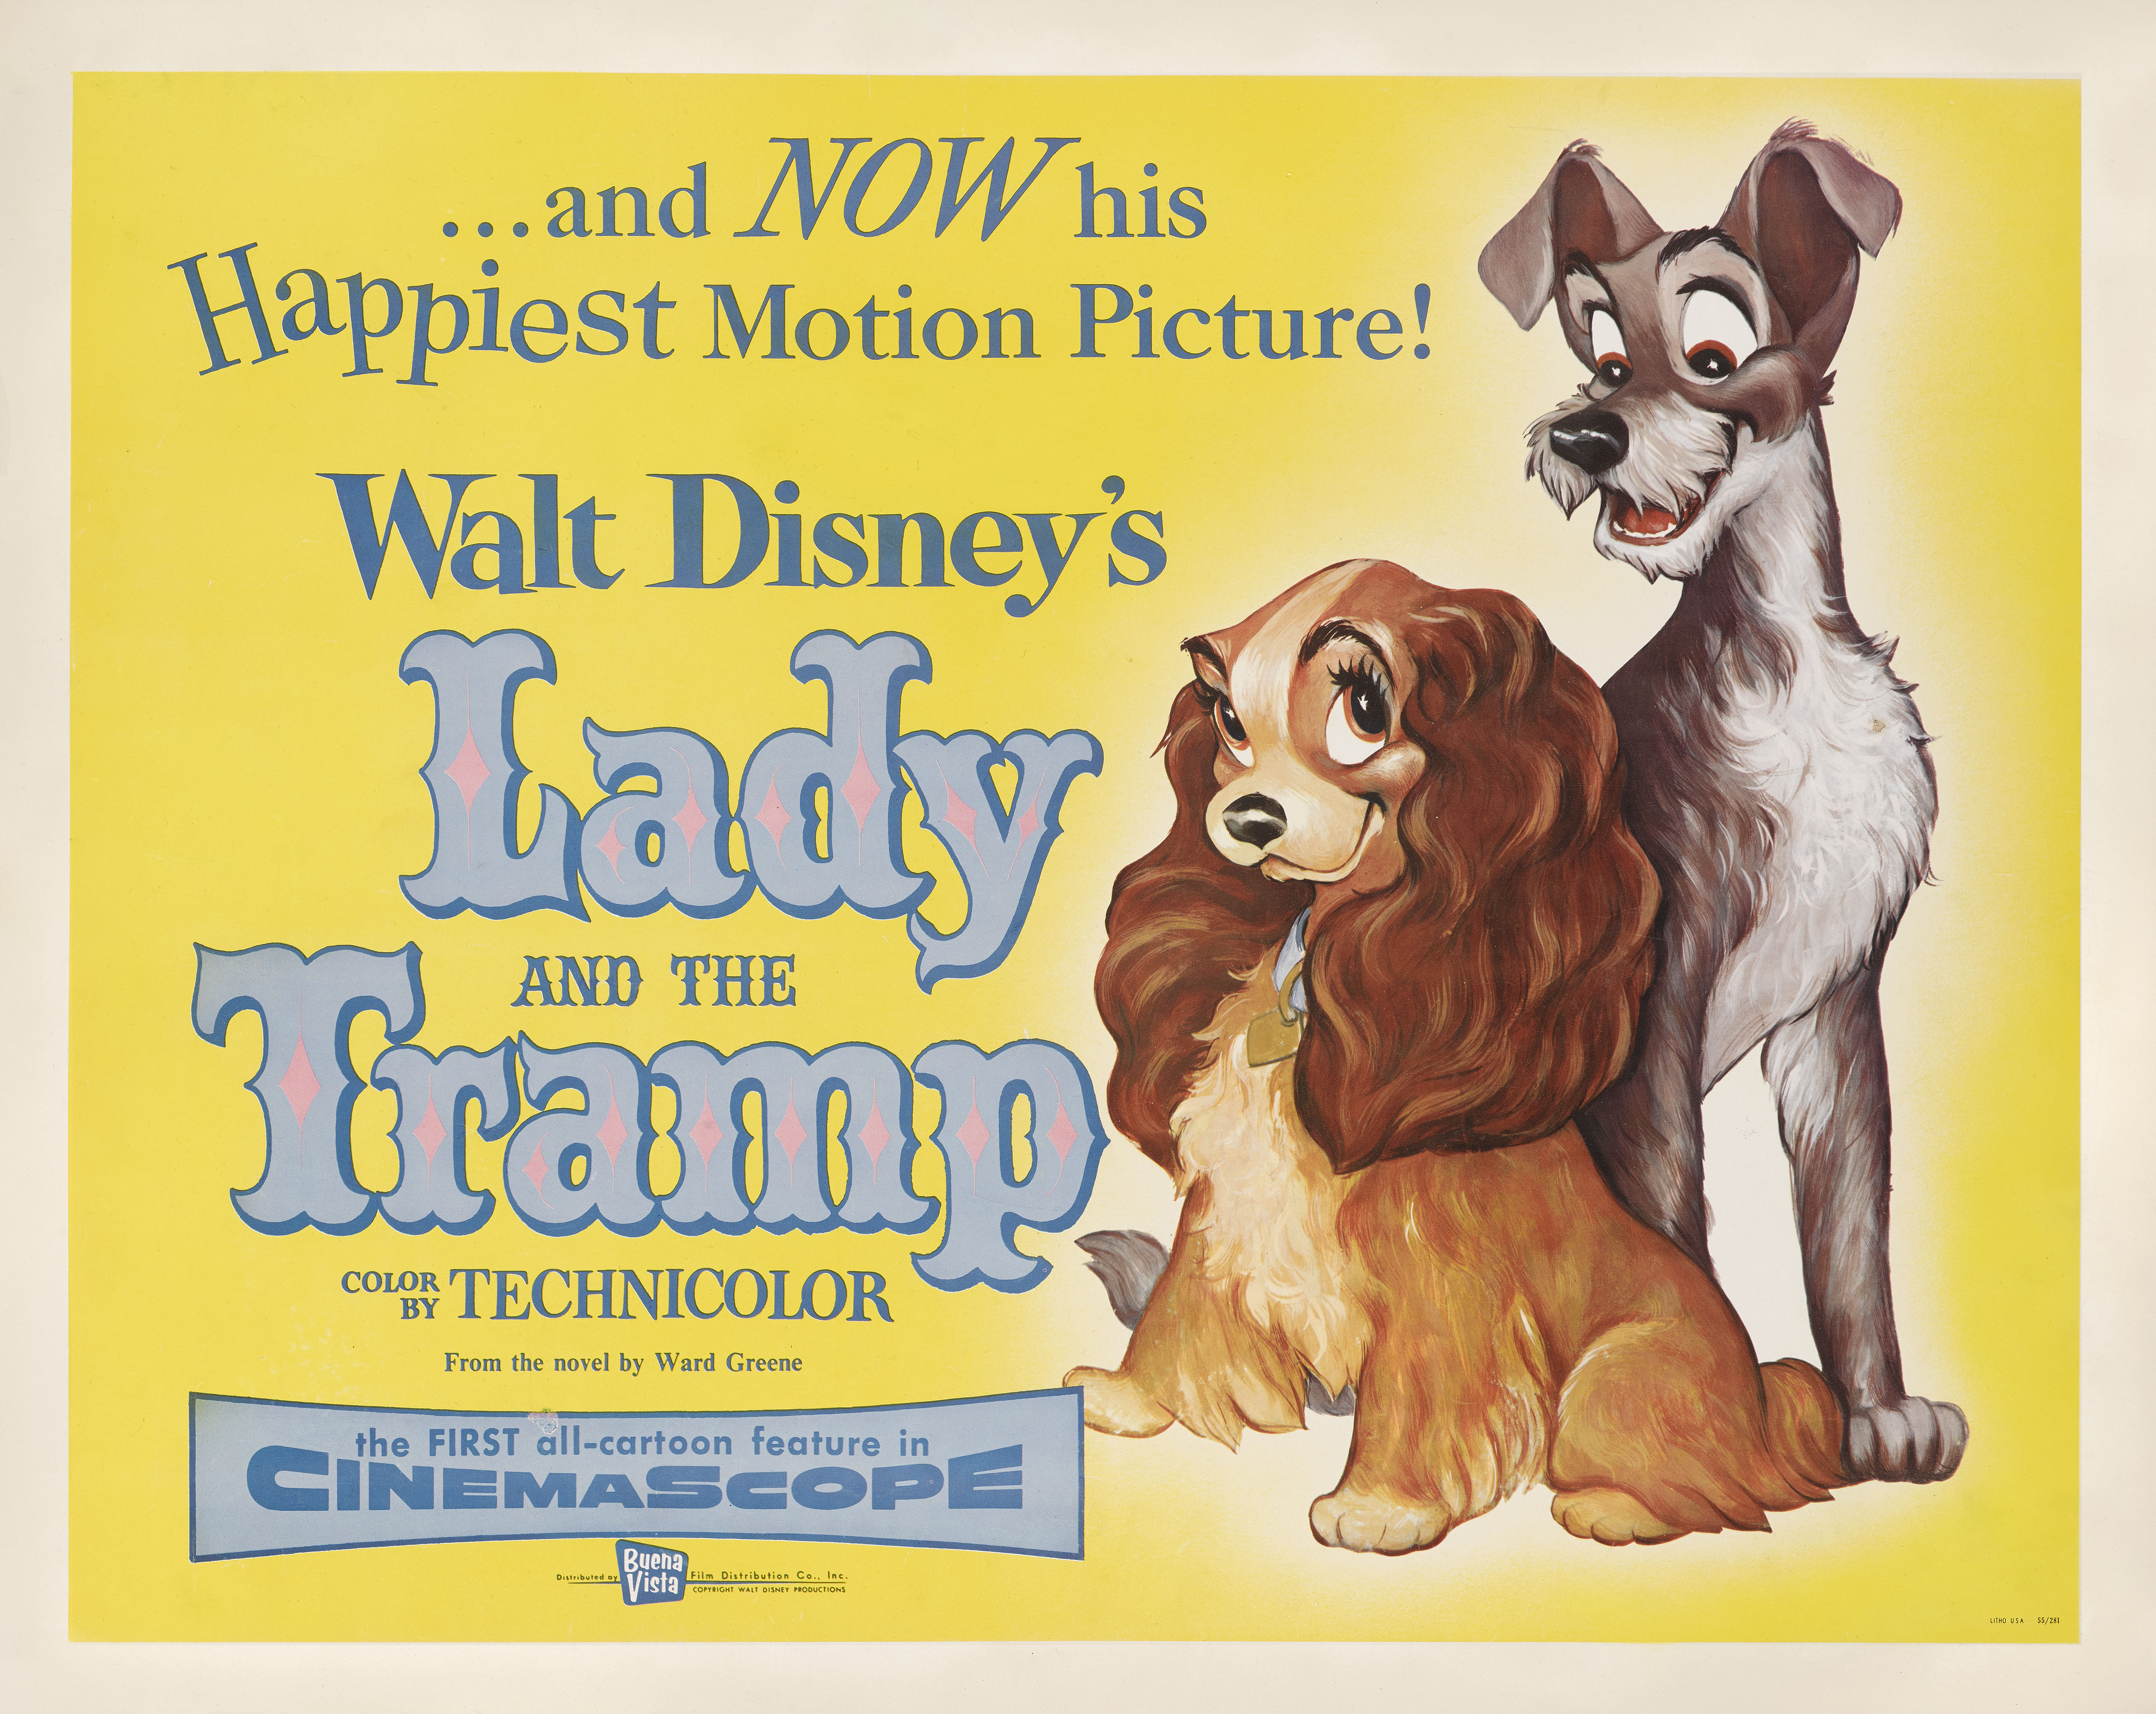 Lady and the Tramp (1955) Original US poster Unframed: 22 x 28 in. (56 x 71 cm)Unfolded and paper ba